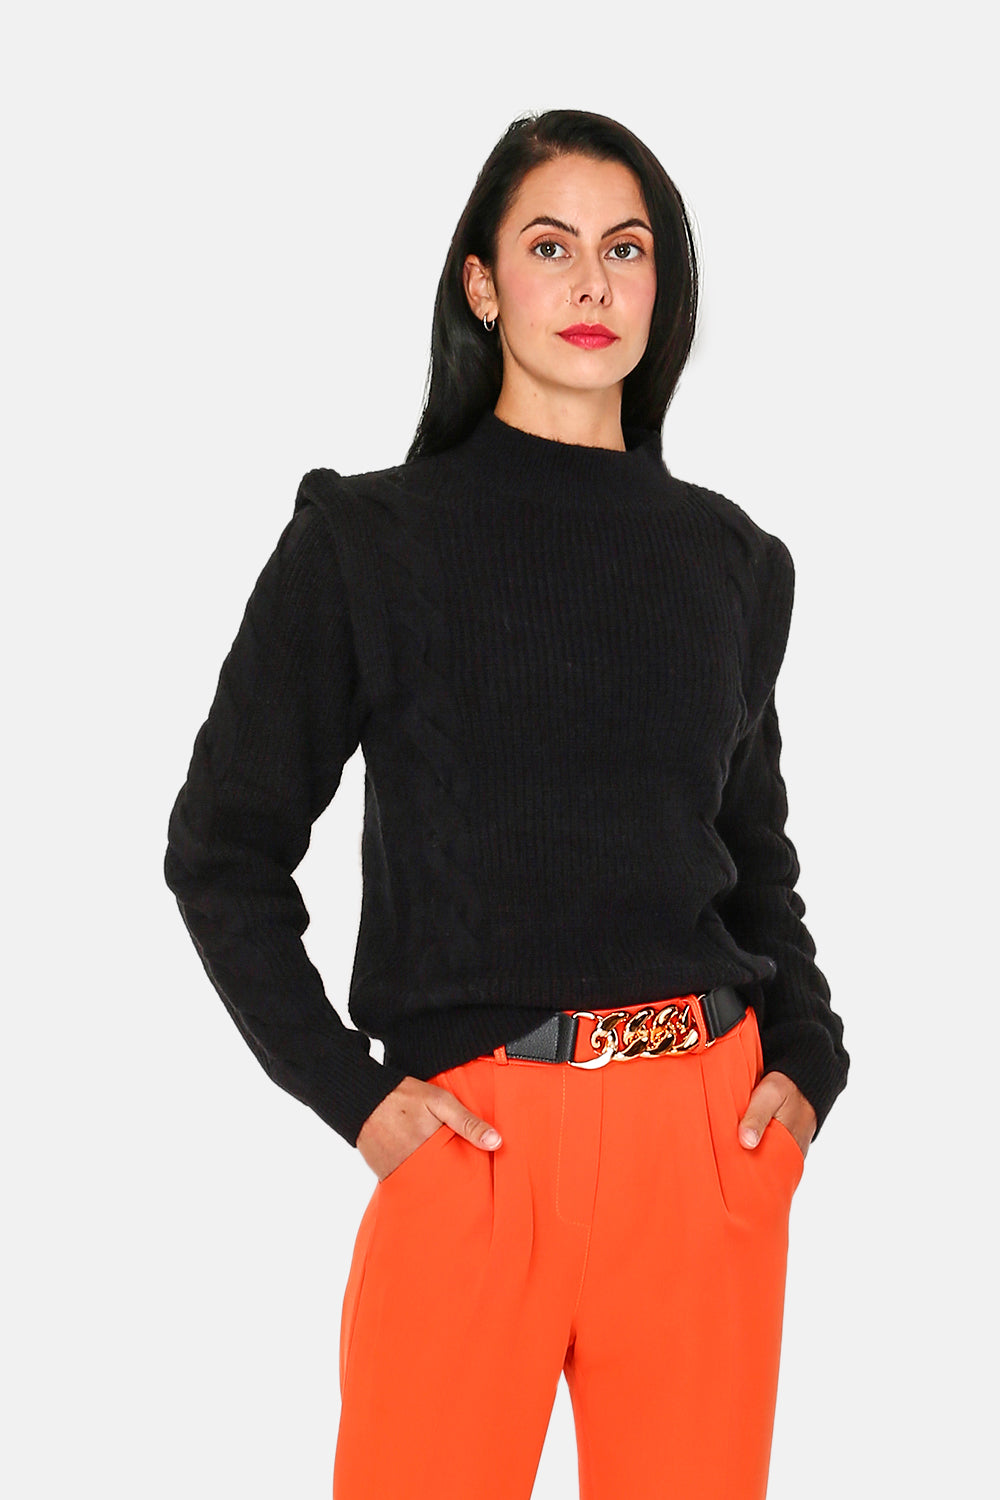 High neck jumper with English ribbing, twist on the front and sleeves